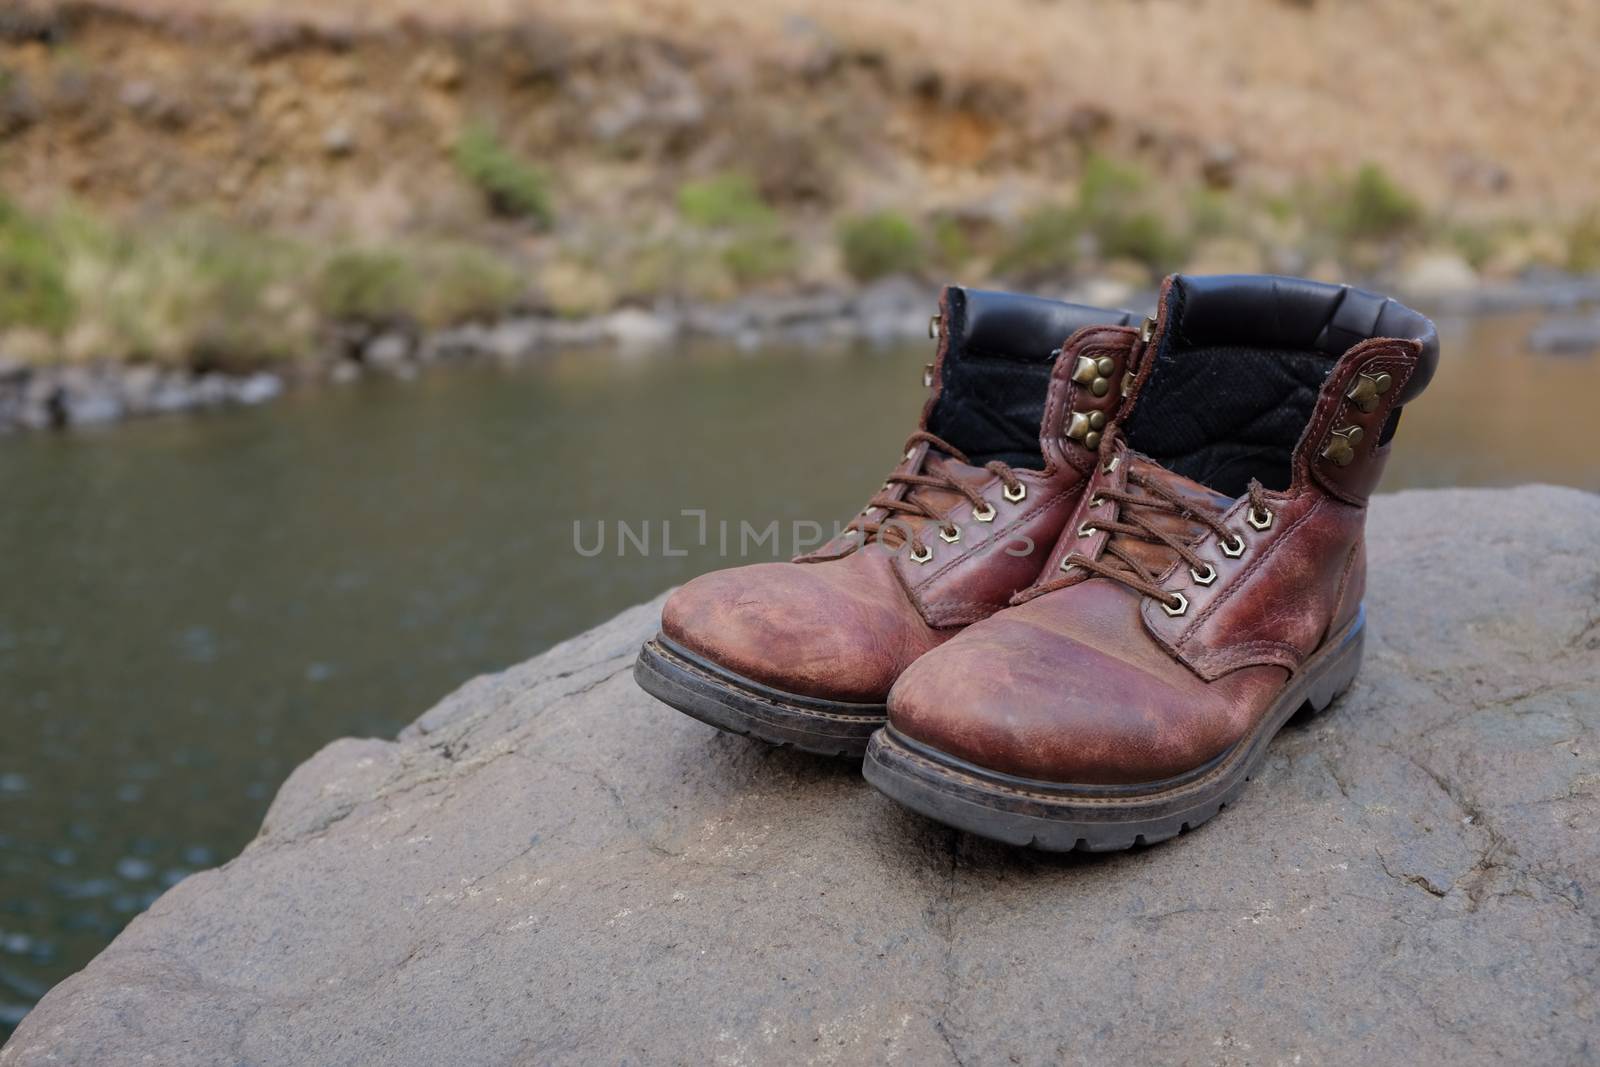 Pair of old hiking boots on rock at river or stream at Lotheni. KwaZulu-Natal in the South African Drakensburg mountains